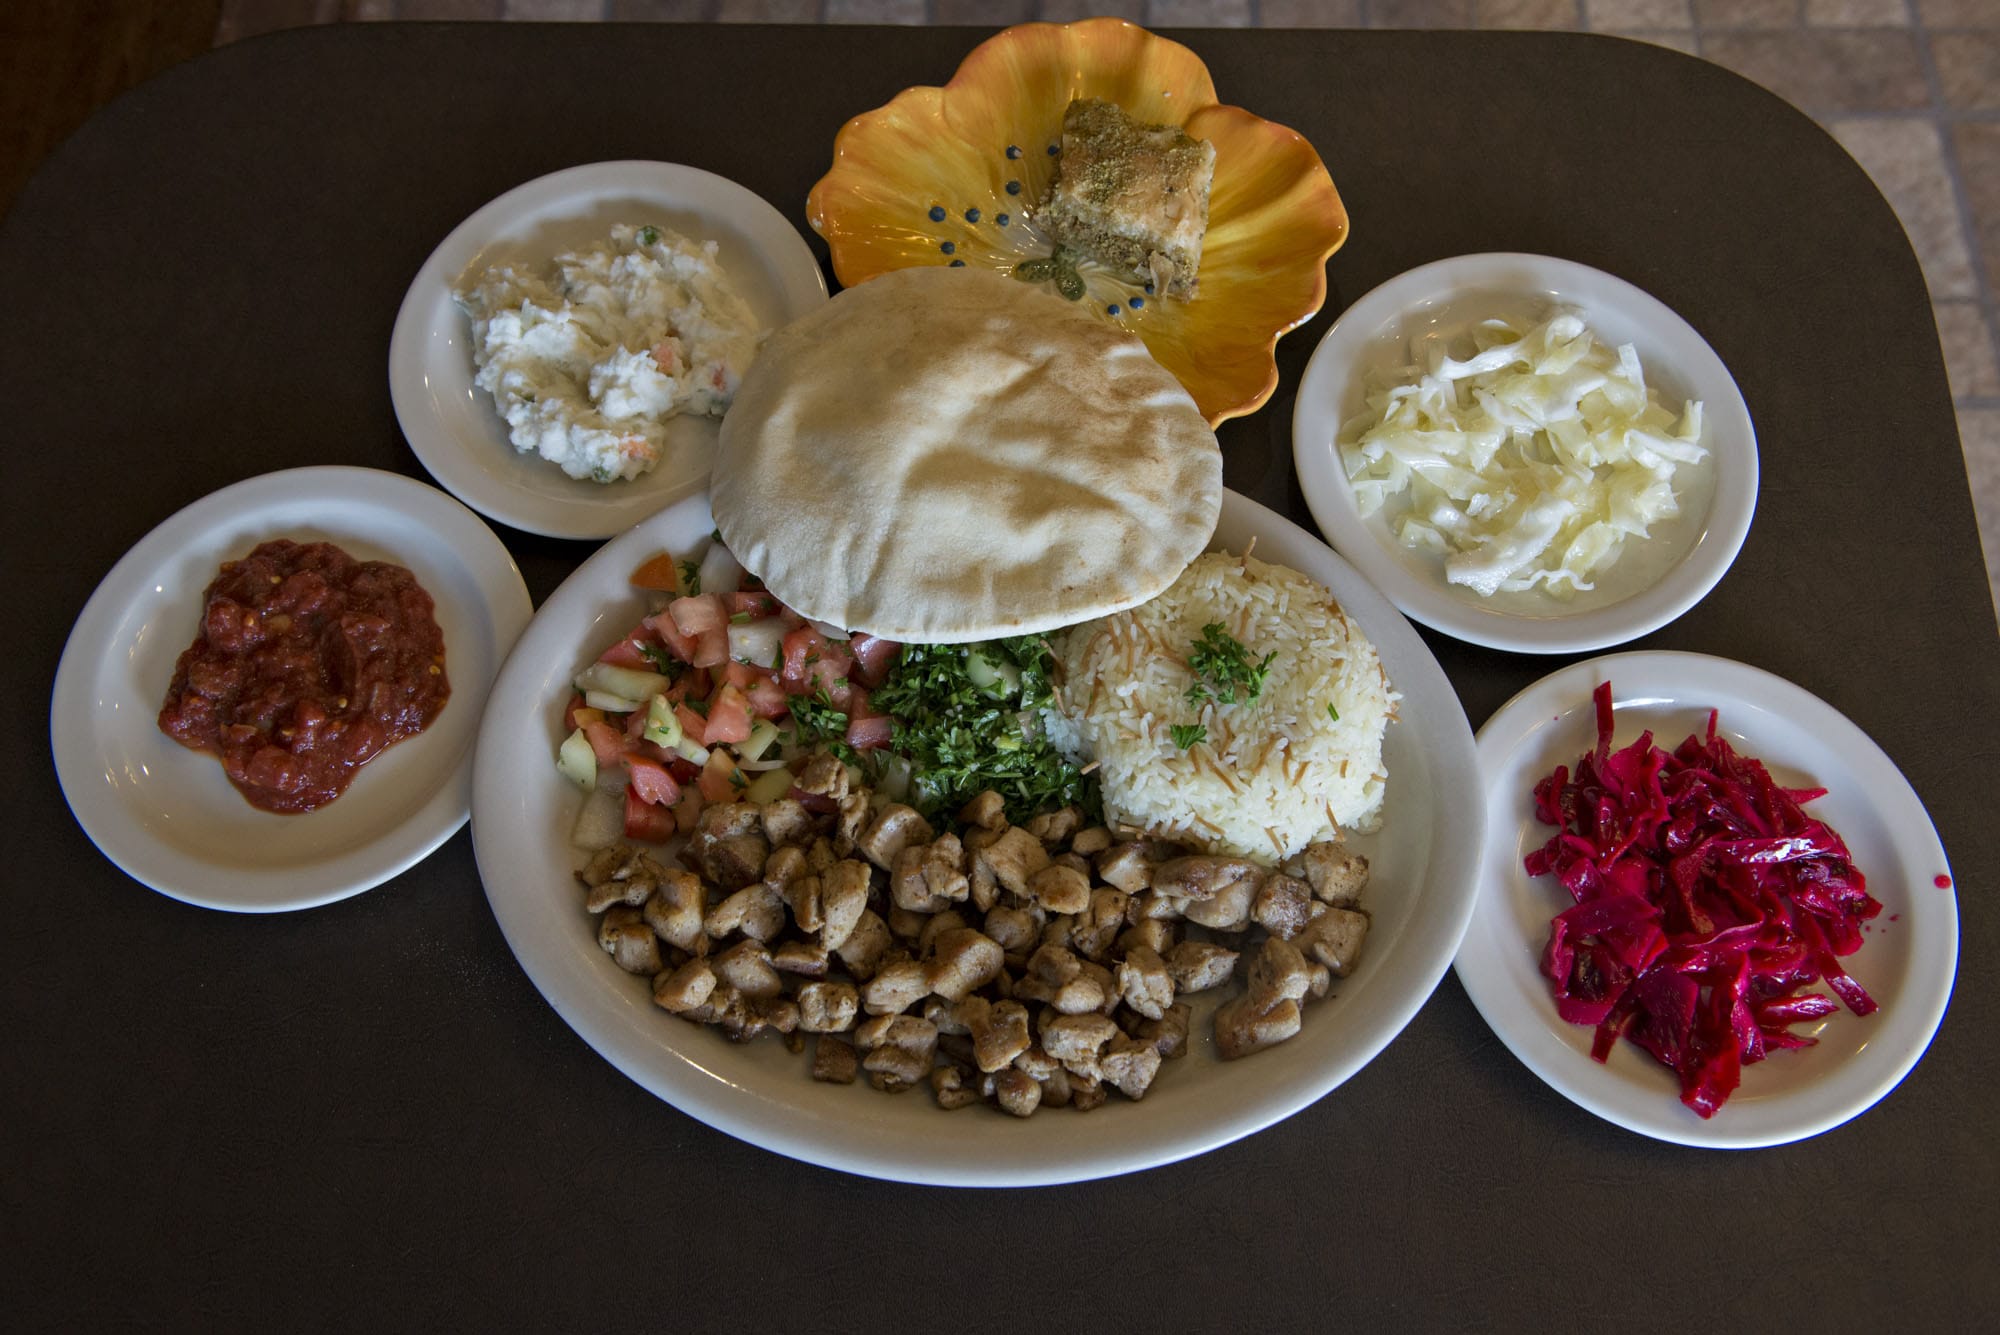 A chicken shawarma dinner, center, is served at the Pita House in Battle Ground along with house spicy sauce, clockwise from bottom left, house potato salad, pistachio baklava, green cabbage and red cabbage.